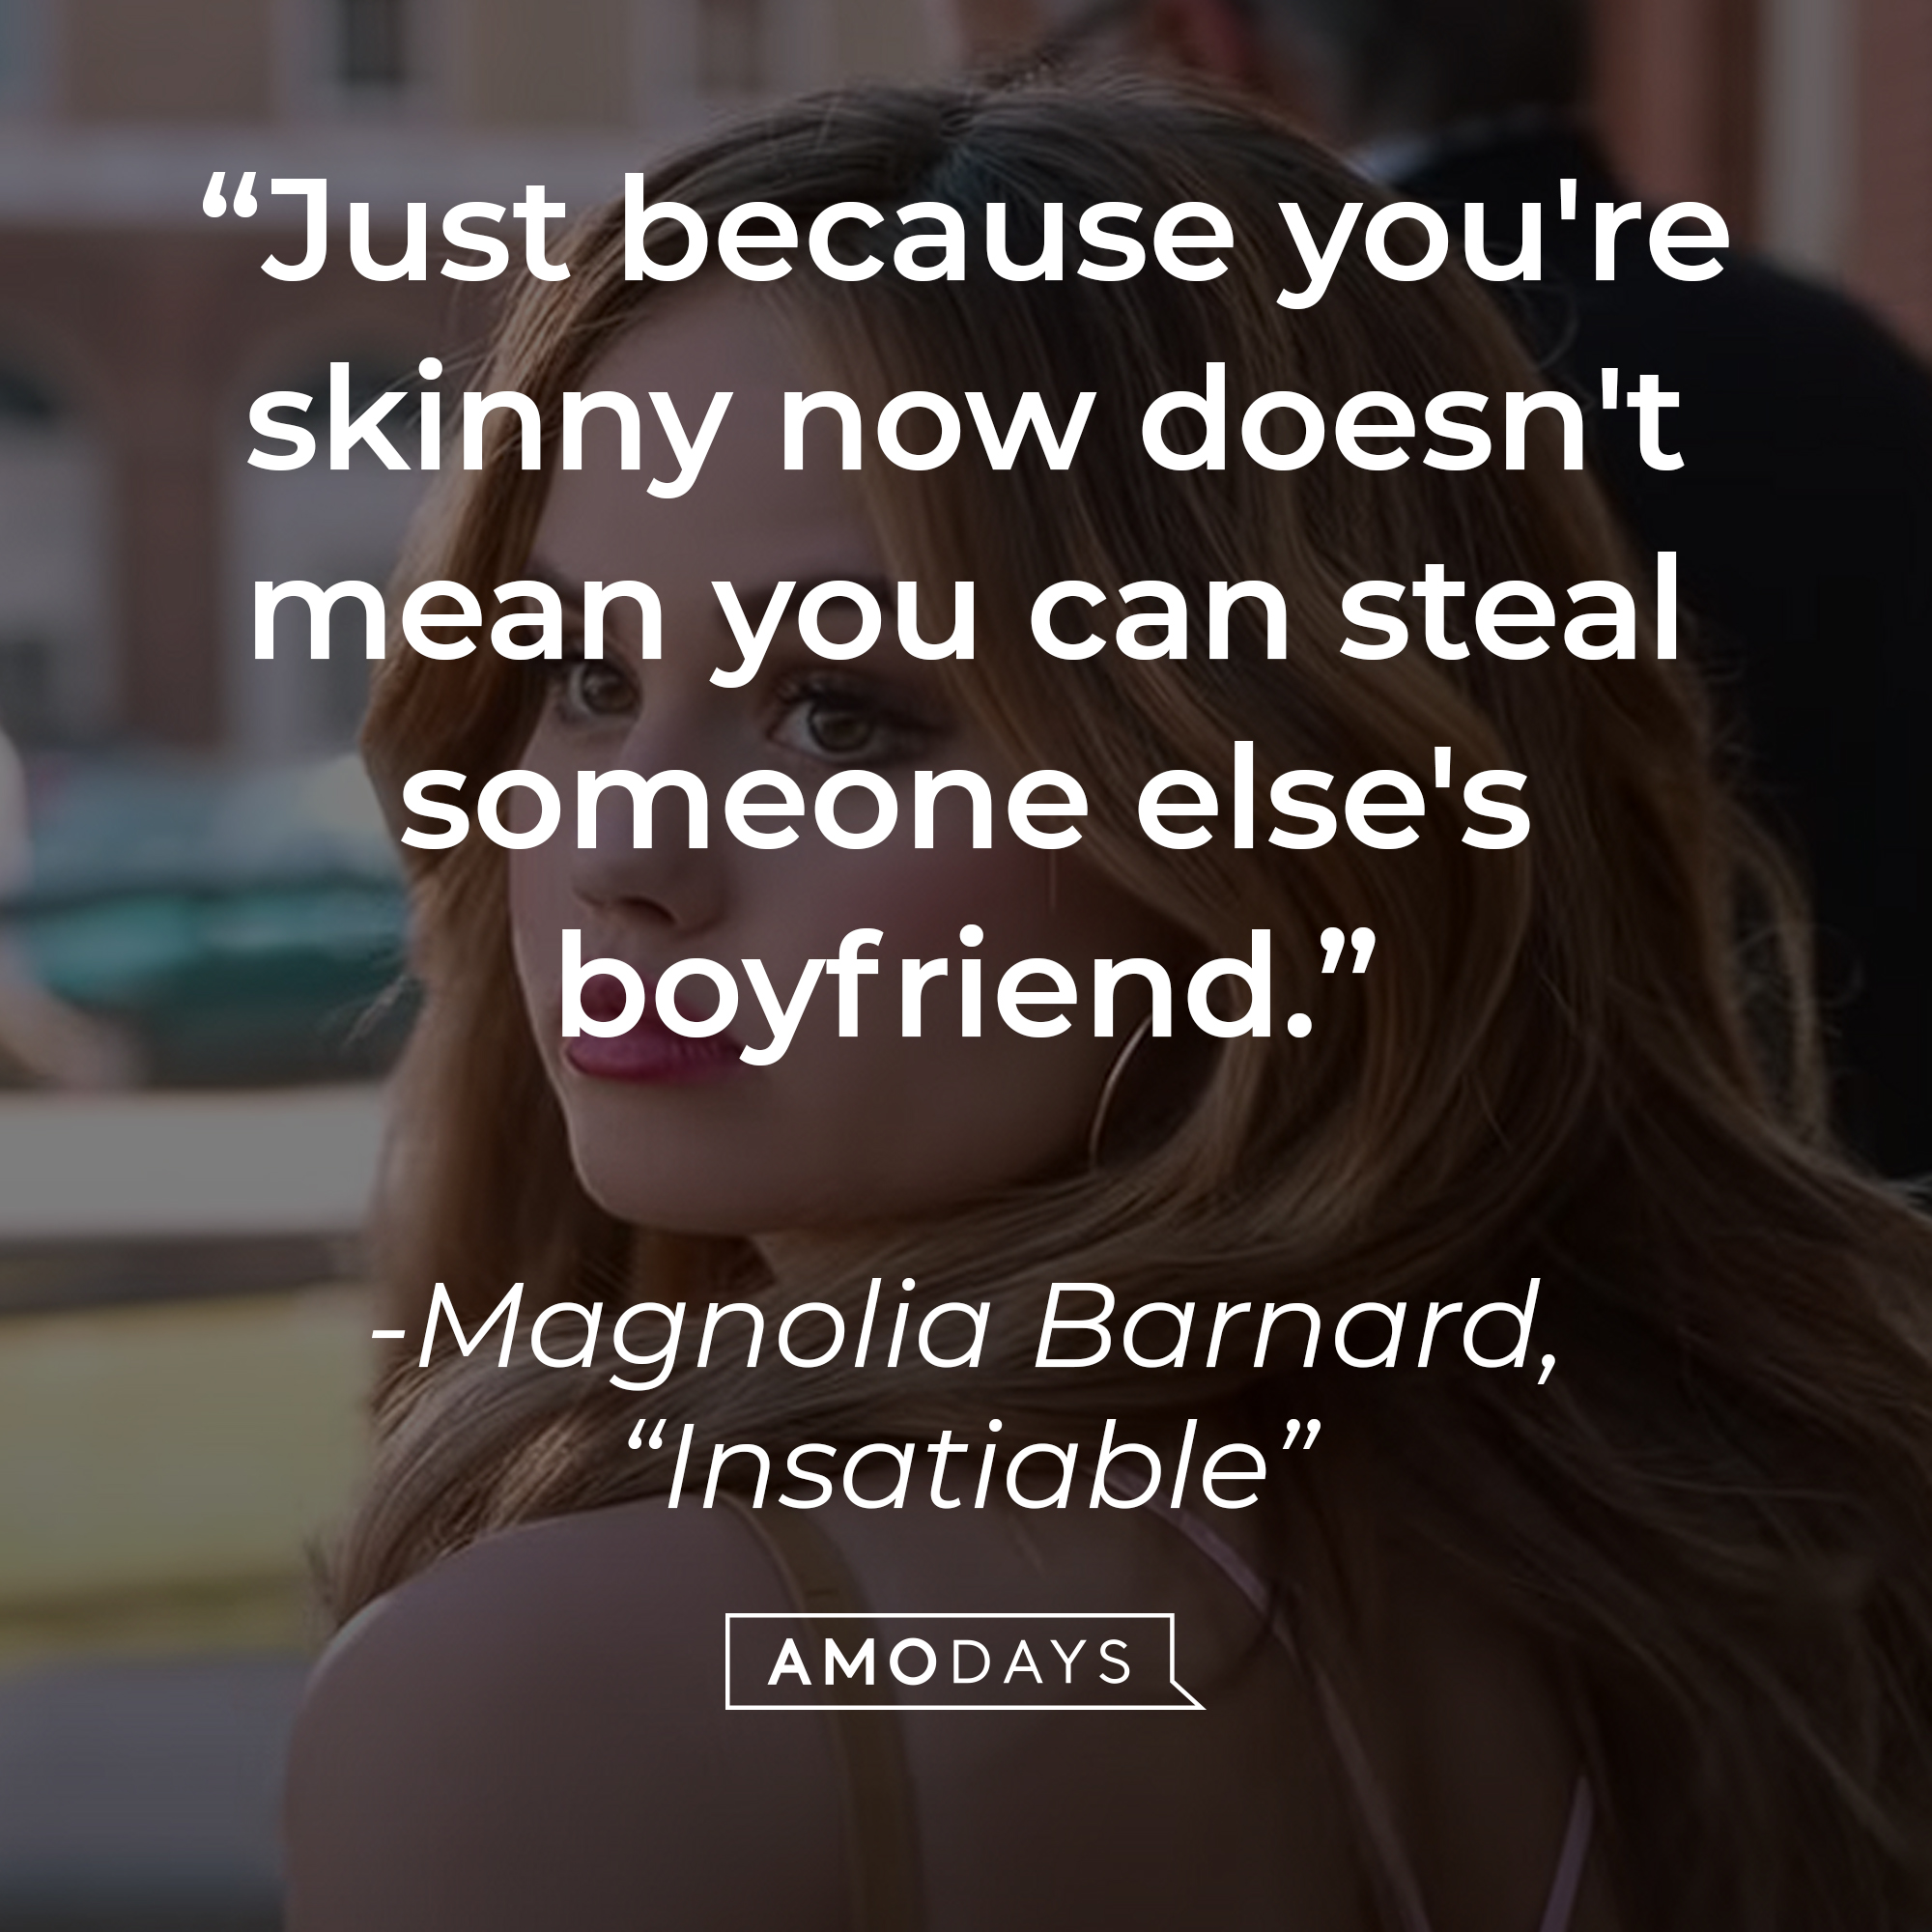 Patty Bladell with Magnolia Barnard's quote on "Insatiable:" “Just because you're skinny now doesn't mean you can steal someone else's boyfriend." | Source: Youtube.com/Netflix